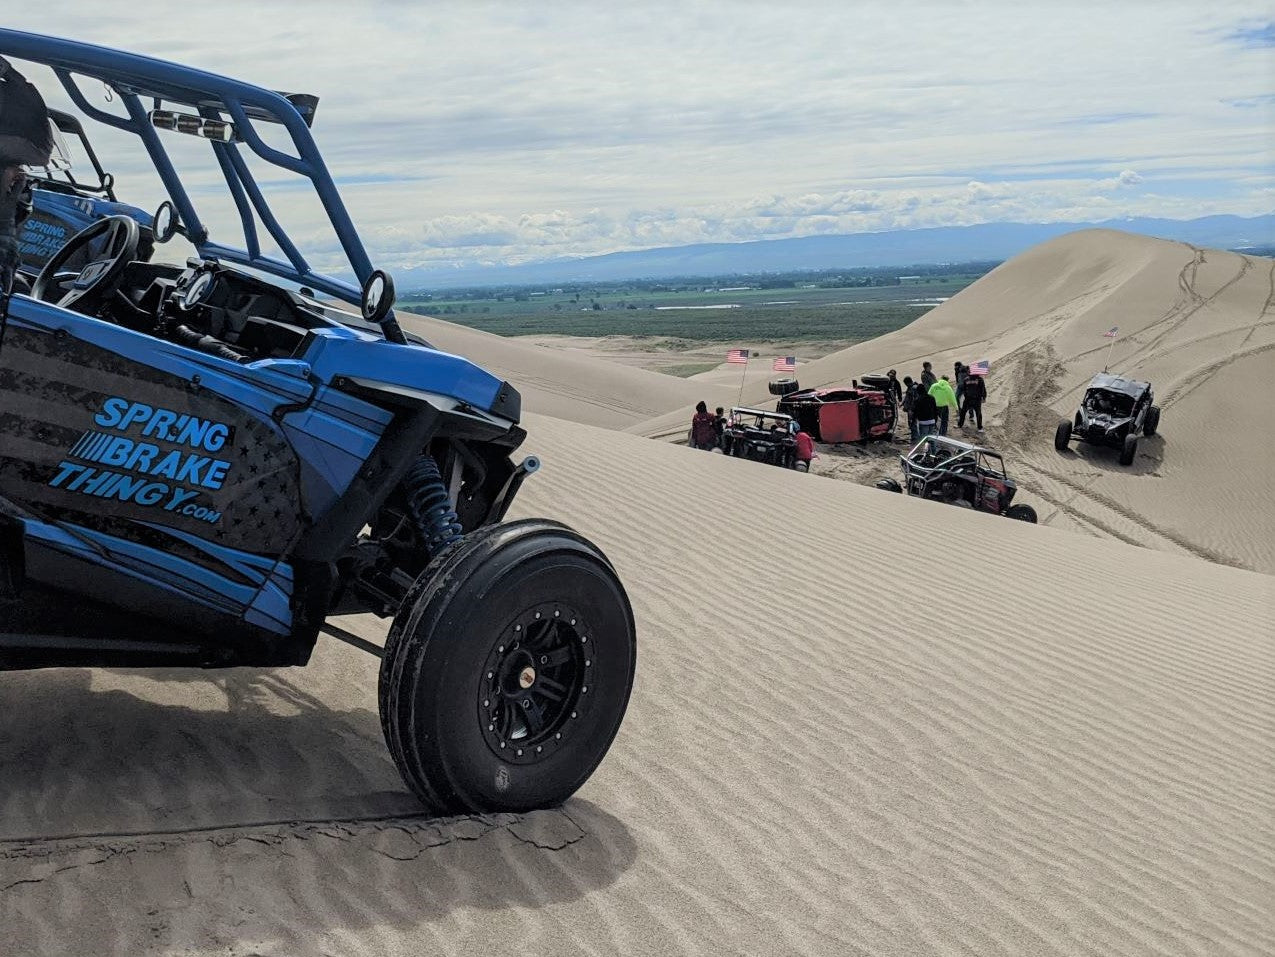 RZR parked on an incline in the sand dunes with spring brake thingy parking brake set because his friend rolled his SxS